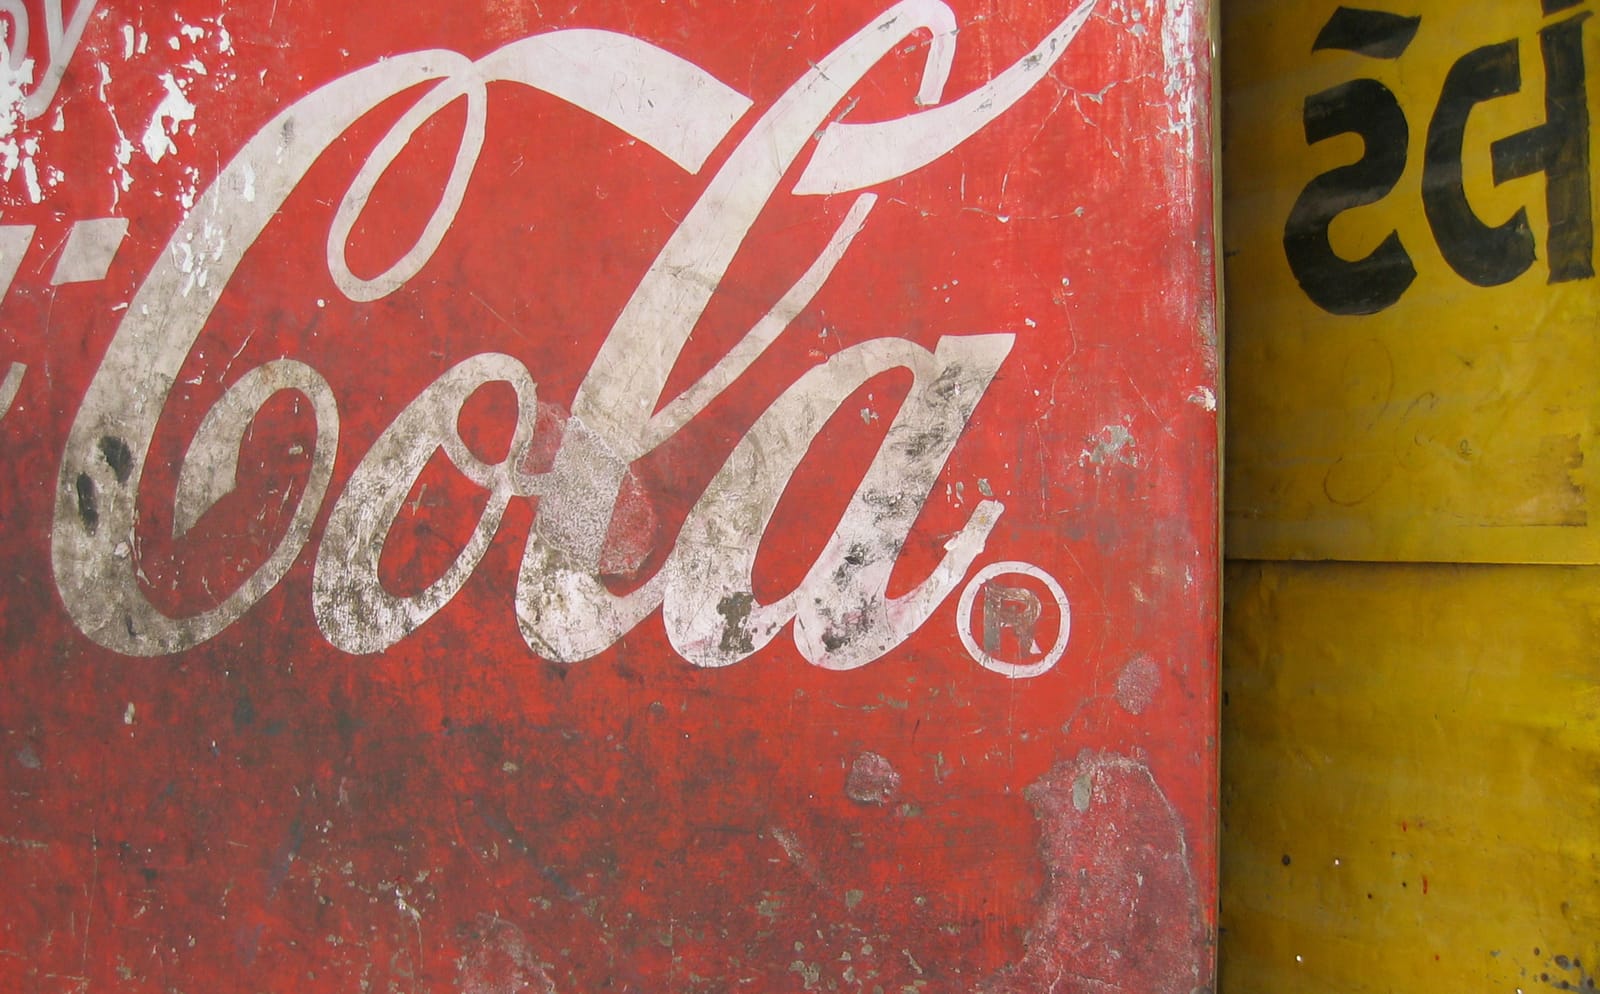 Second portion of the Coca-Cola cursive logotype in white on red, where the panel had been aged by dirt and knocks.